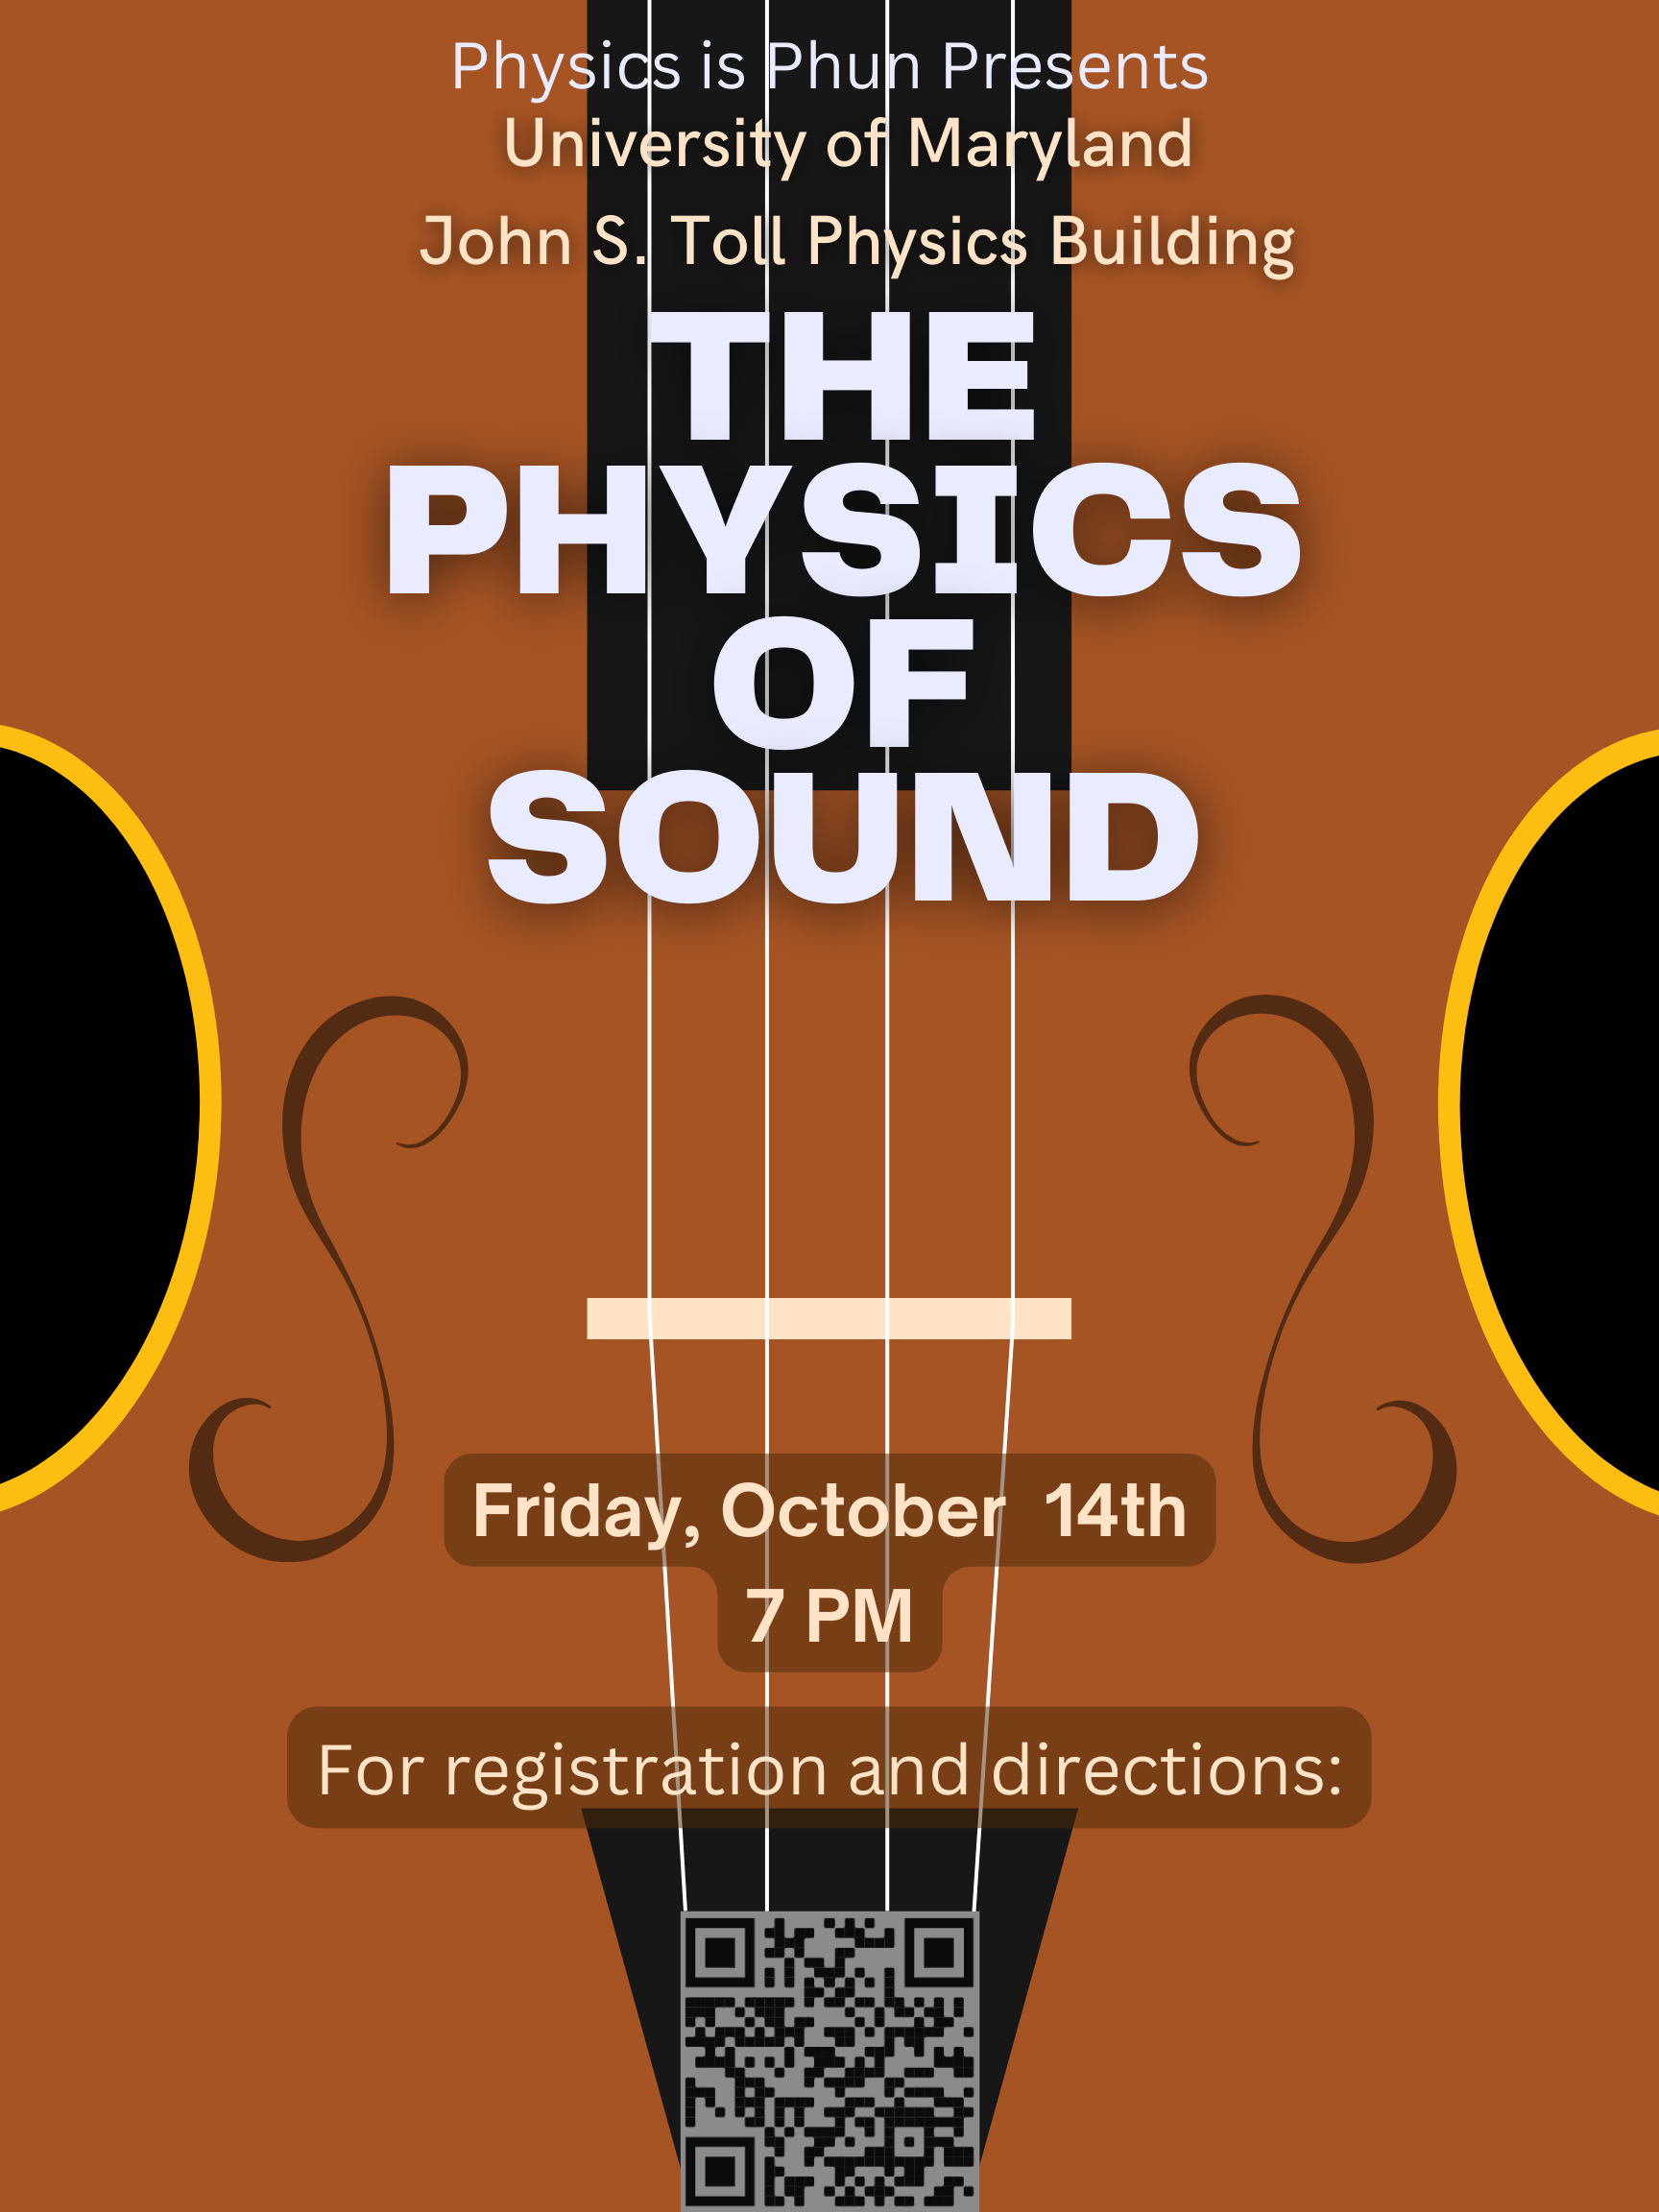 The Physics of Sound for Physics is Phun